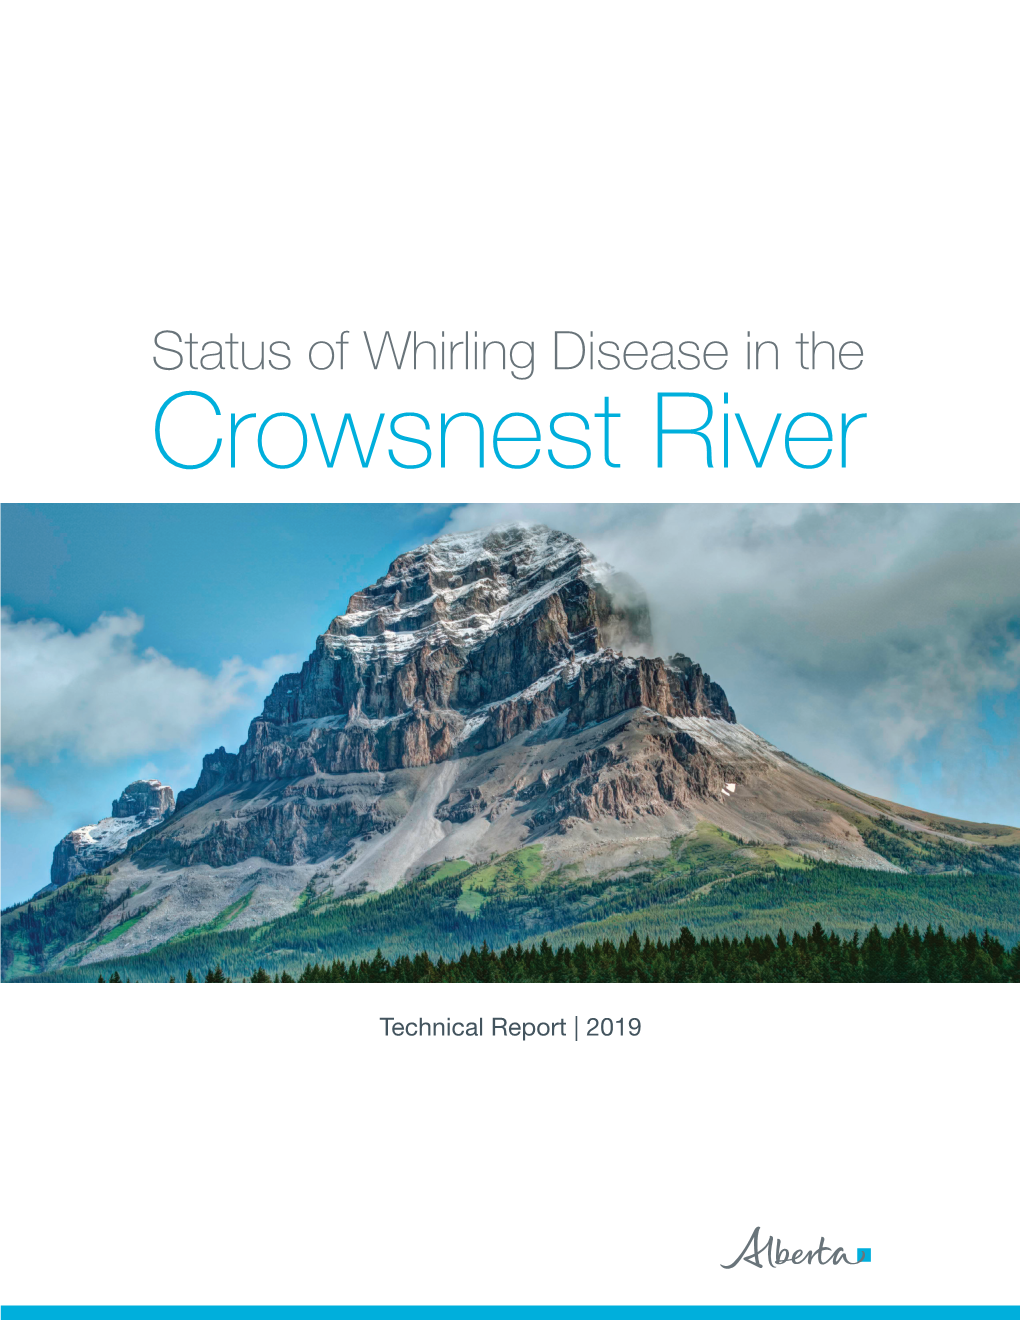 Status of Whirling Disease in the Crowsnest River